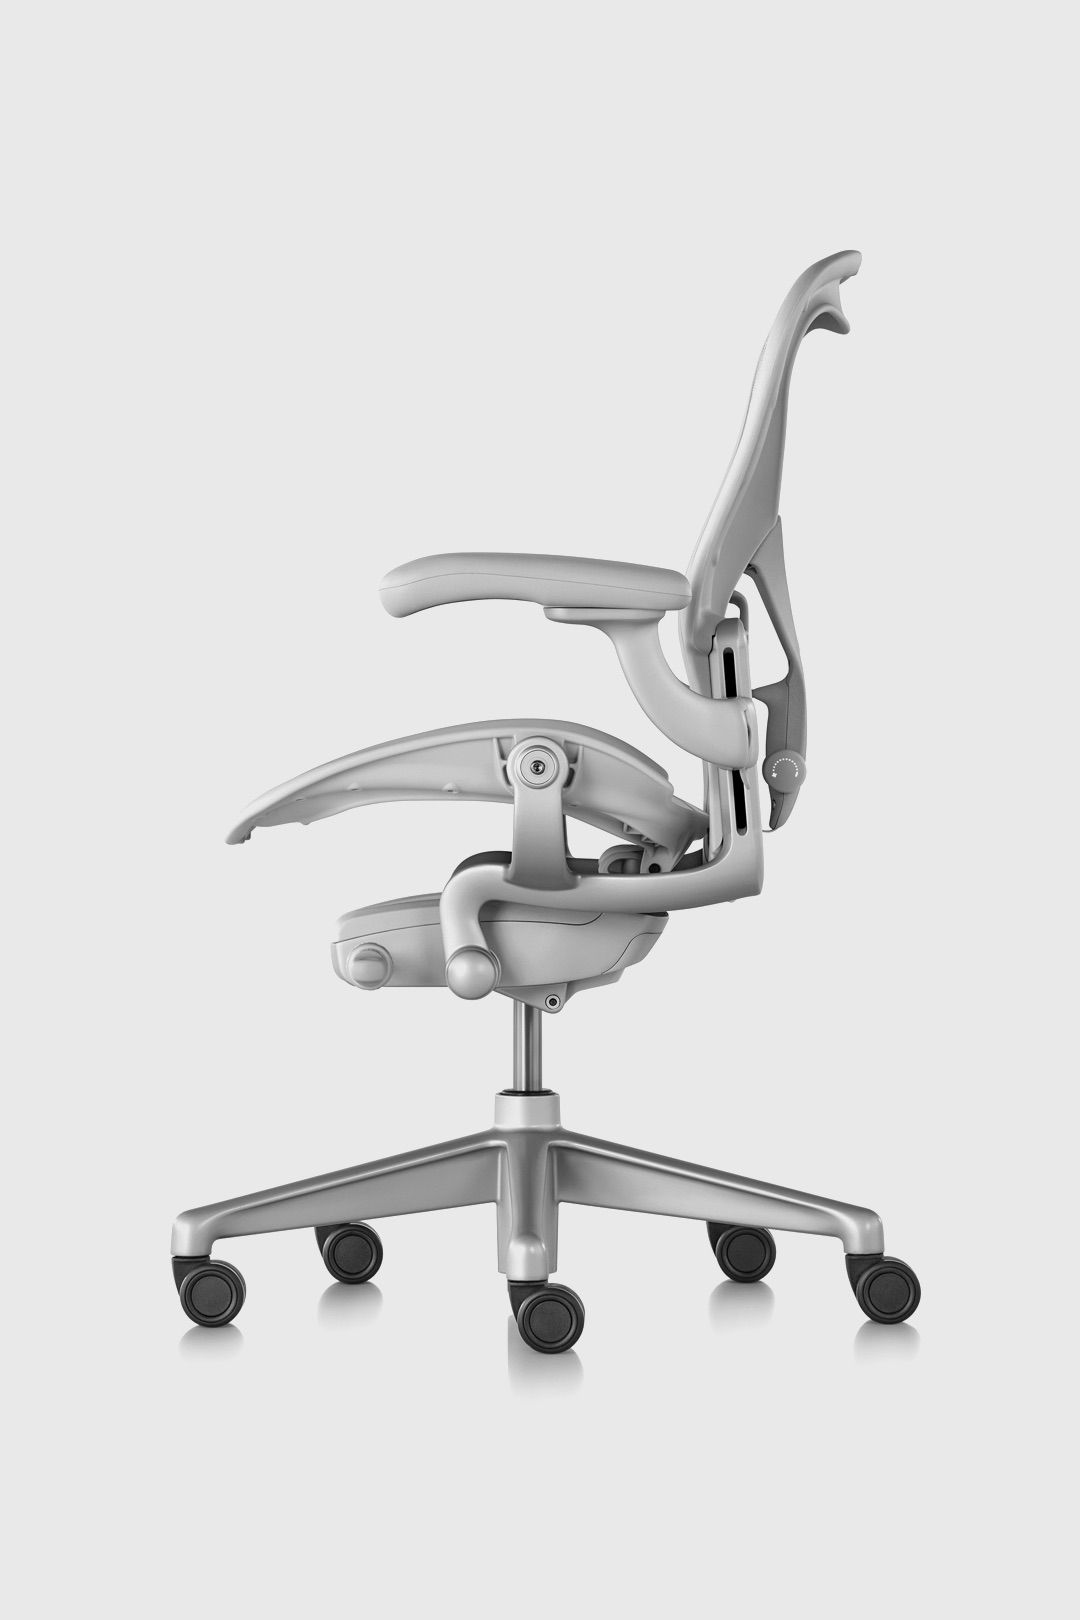 Reasons to opt for office chairs without
wheels